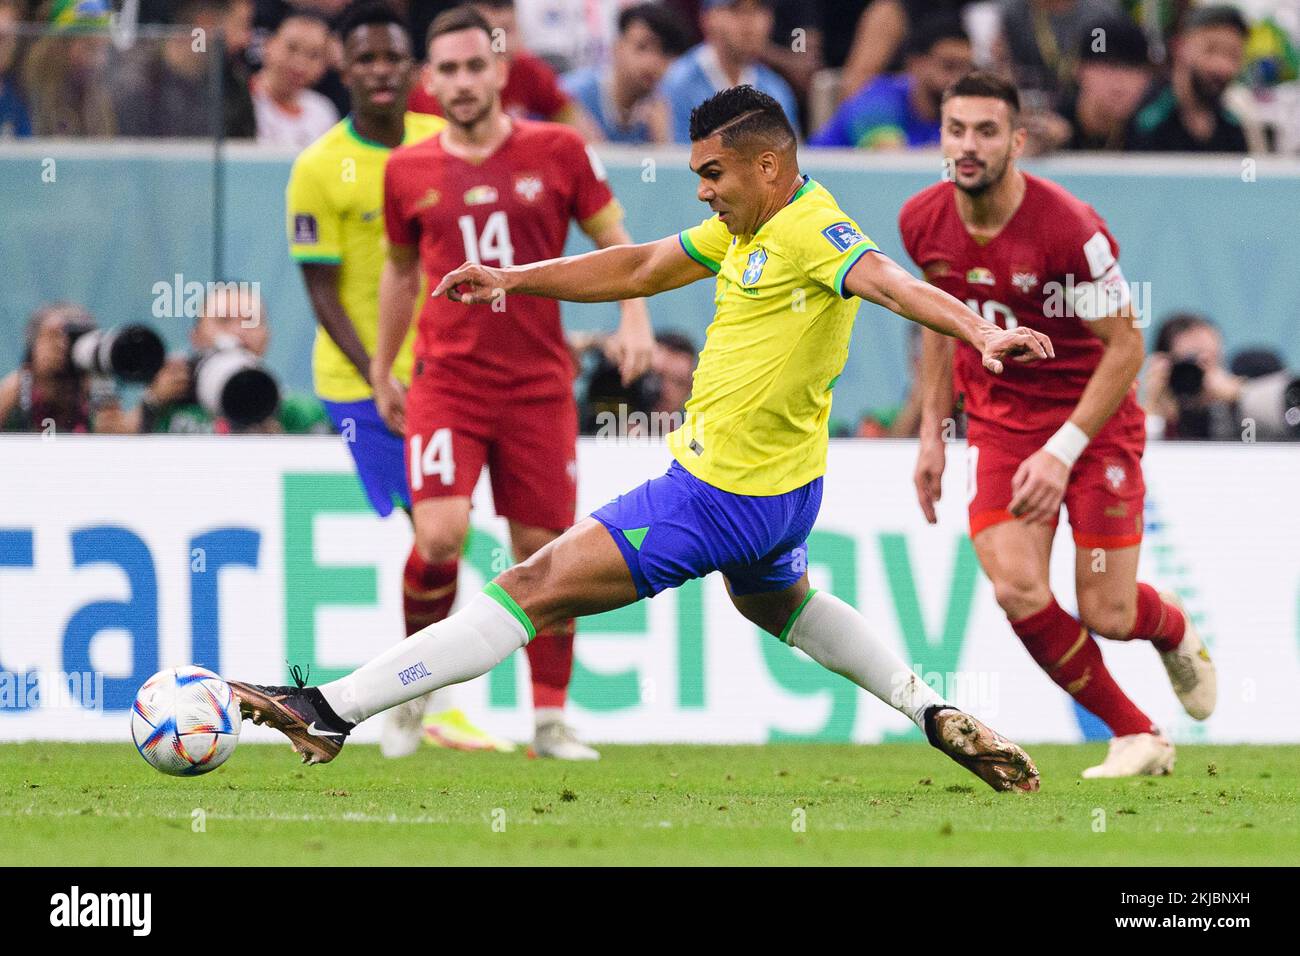 Lusail, Qatar. 24th Nov, 2022. Lusail, Qatar, Nov 25th 2022: Casemiro of Brazil during a match between Brazil vs Serbia, valid for the group stage of the World Cup, held at the Lusail National Stadium in Lusail, Qatar. (Marcio Machado/SPP) Credit: SPP Sport Press Photo. /Alamy Live News Stock Photo